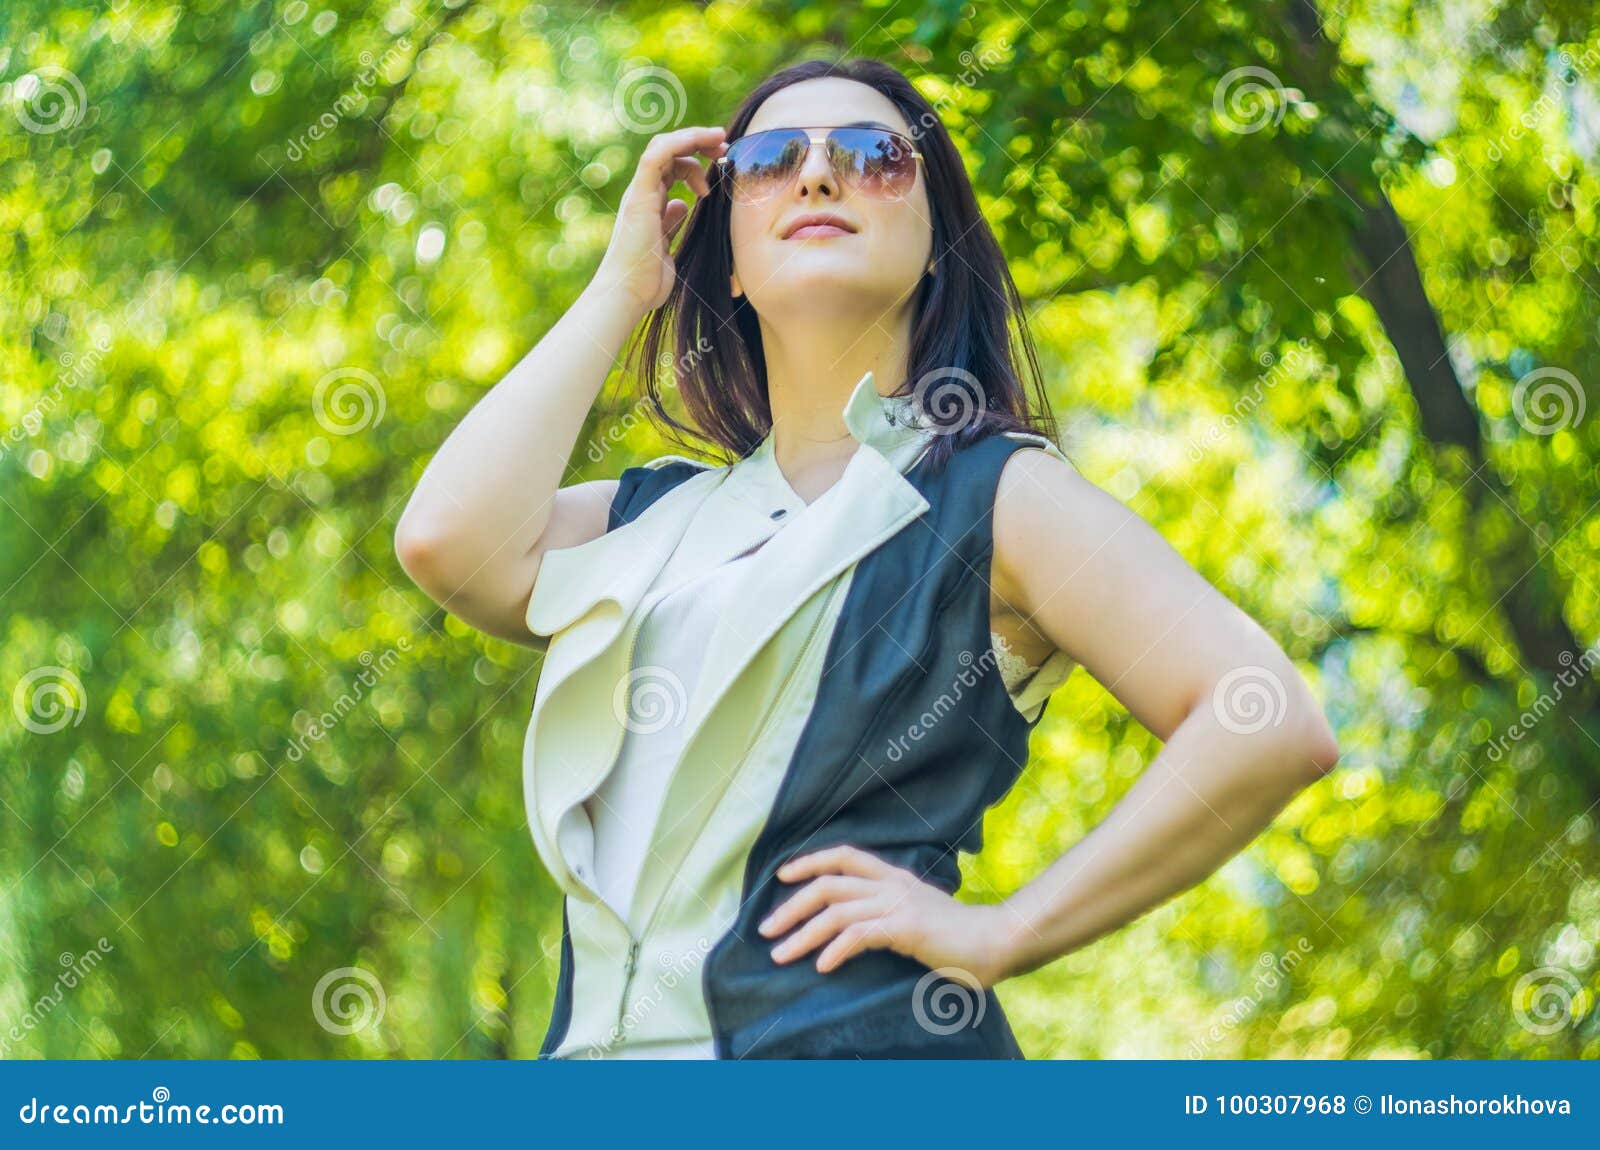 Stylish woman in the park stock photo. Image of lifestyle - 100307968